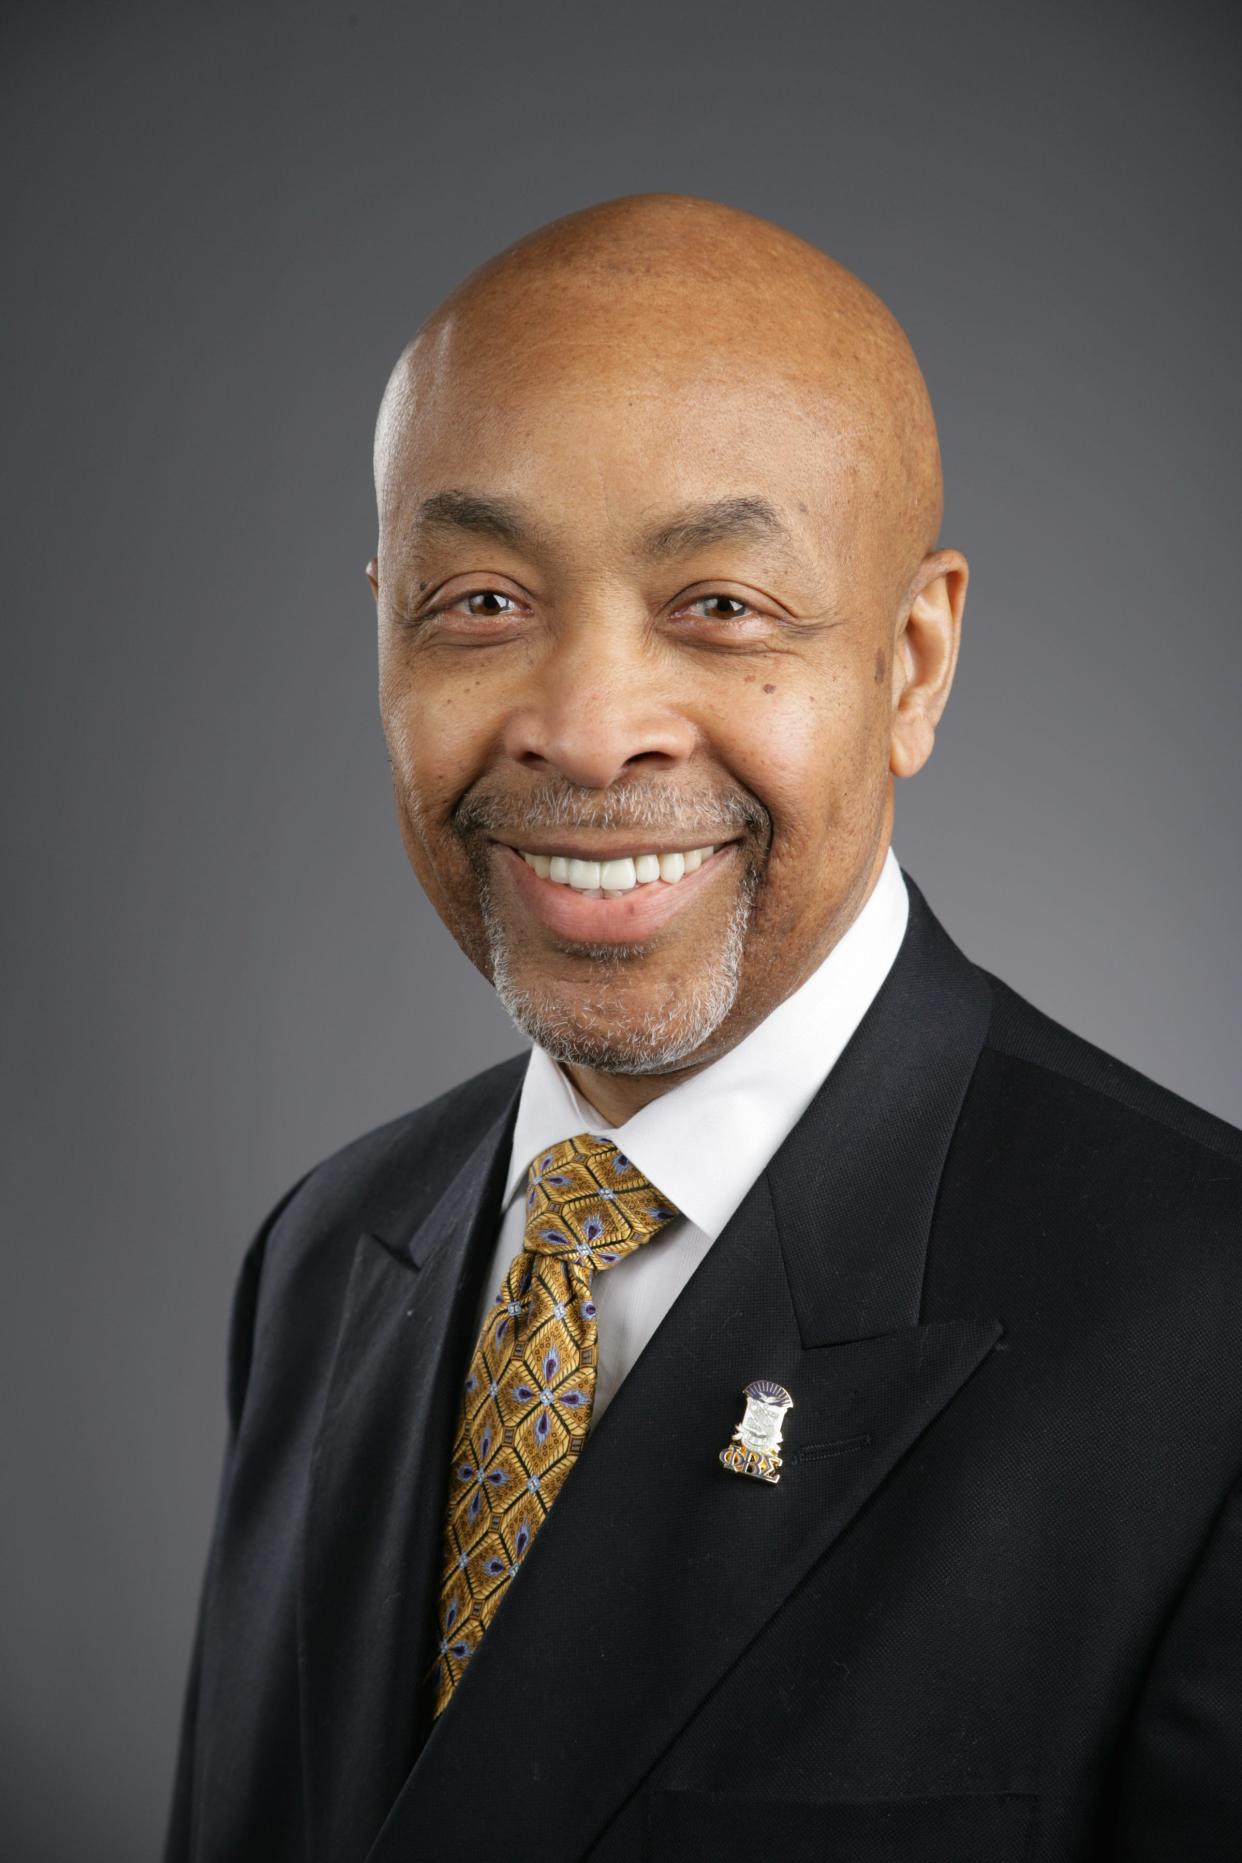 Johnnie Early is dean of FAMU's College of Pharmacy and Pharmaceutical Sciences, Institute of Health.